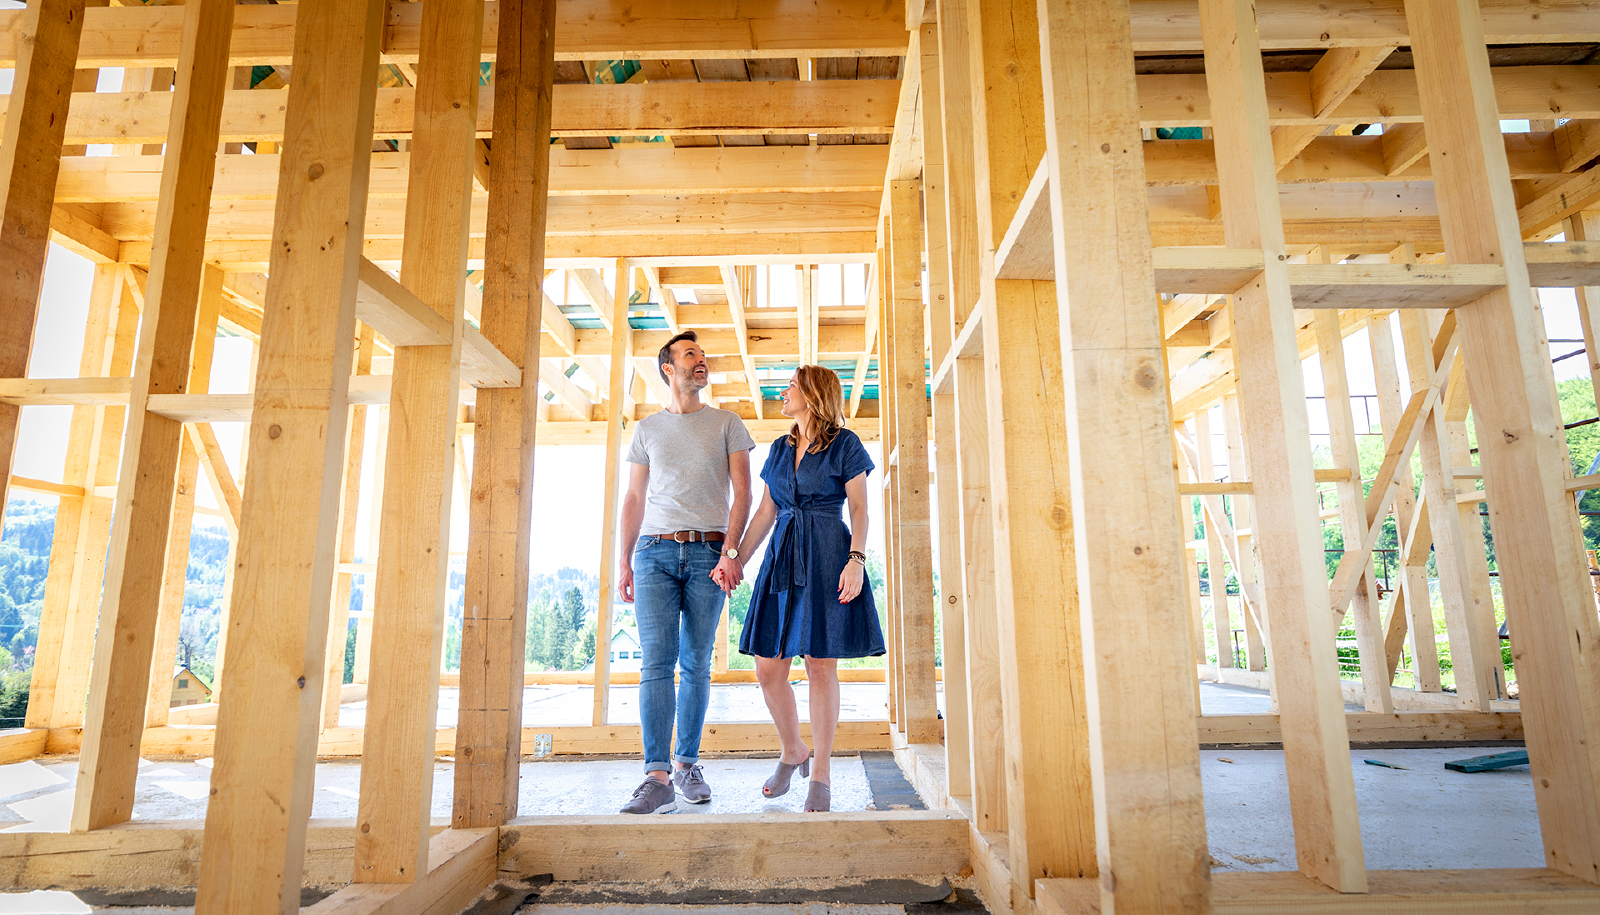 Homeowners Insurance During Construction: What You Need to Know